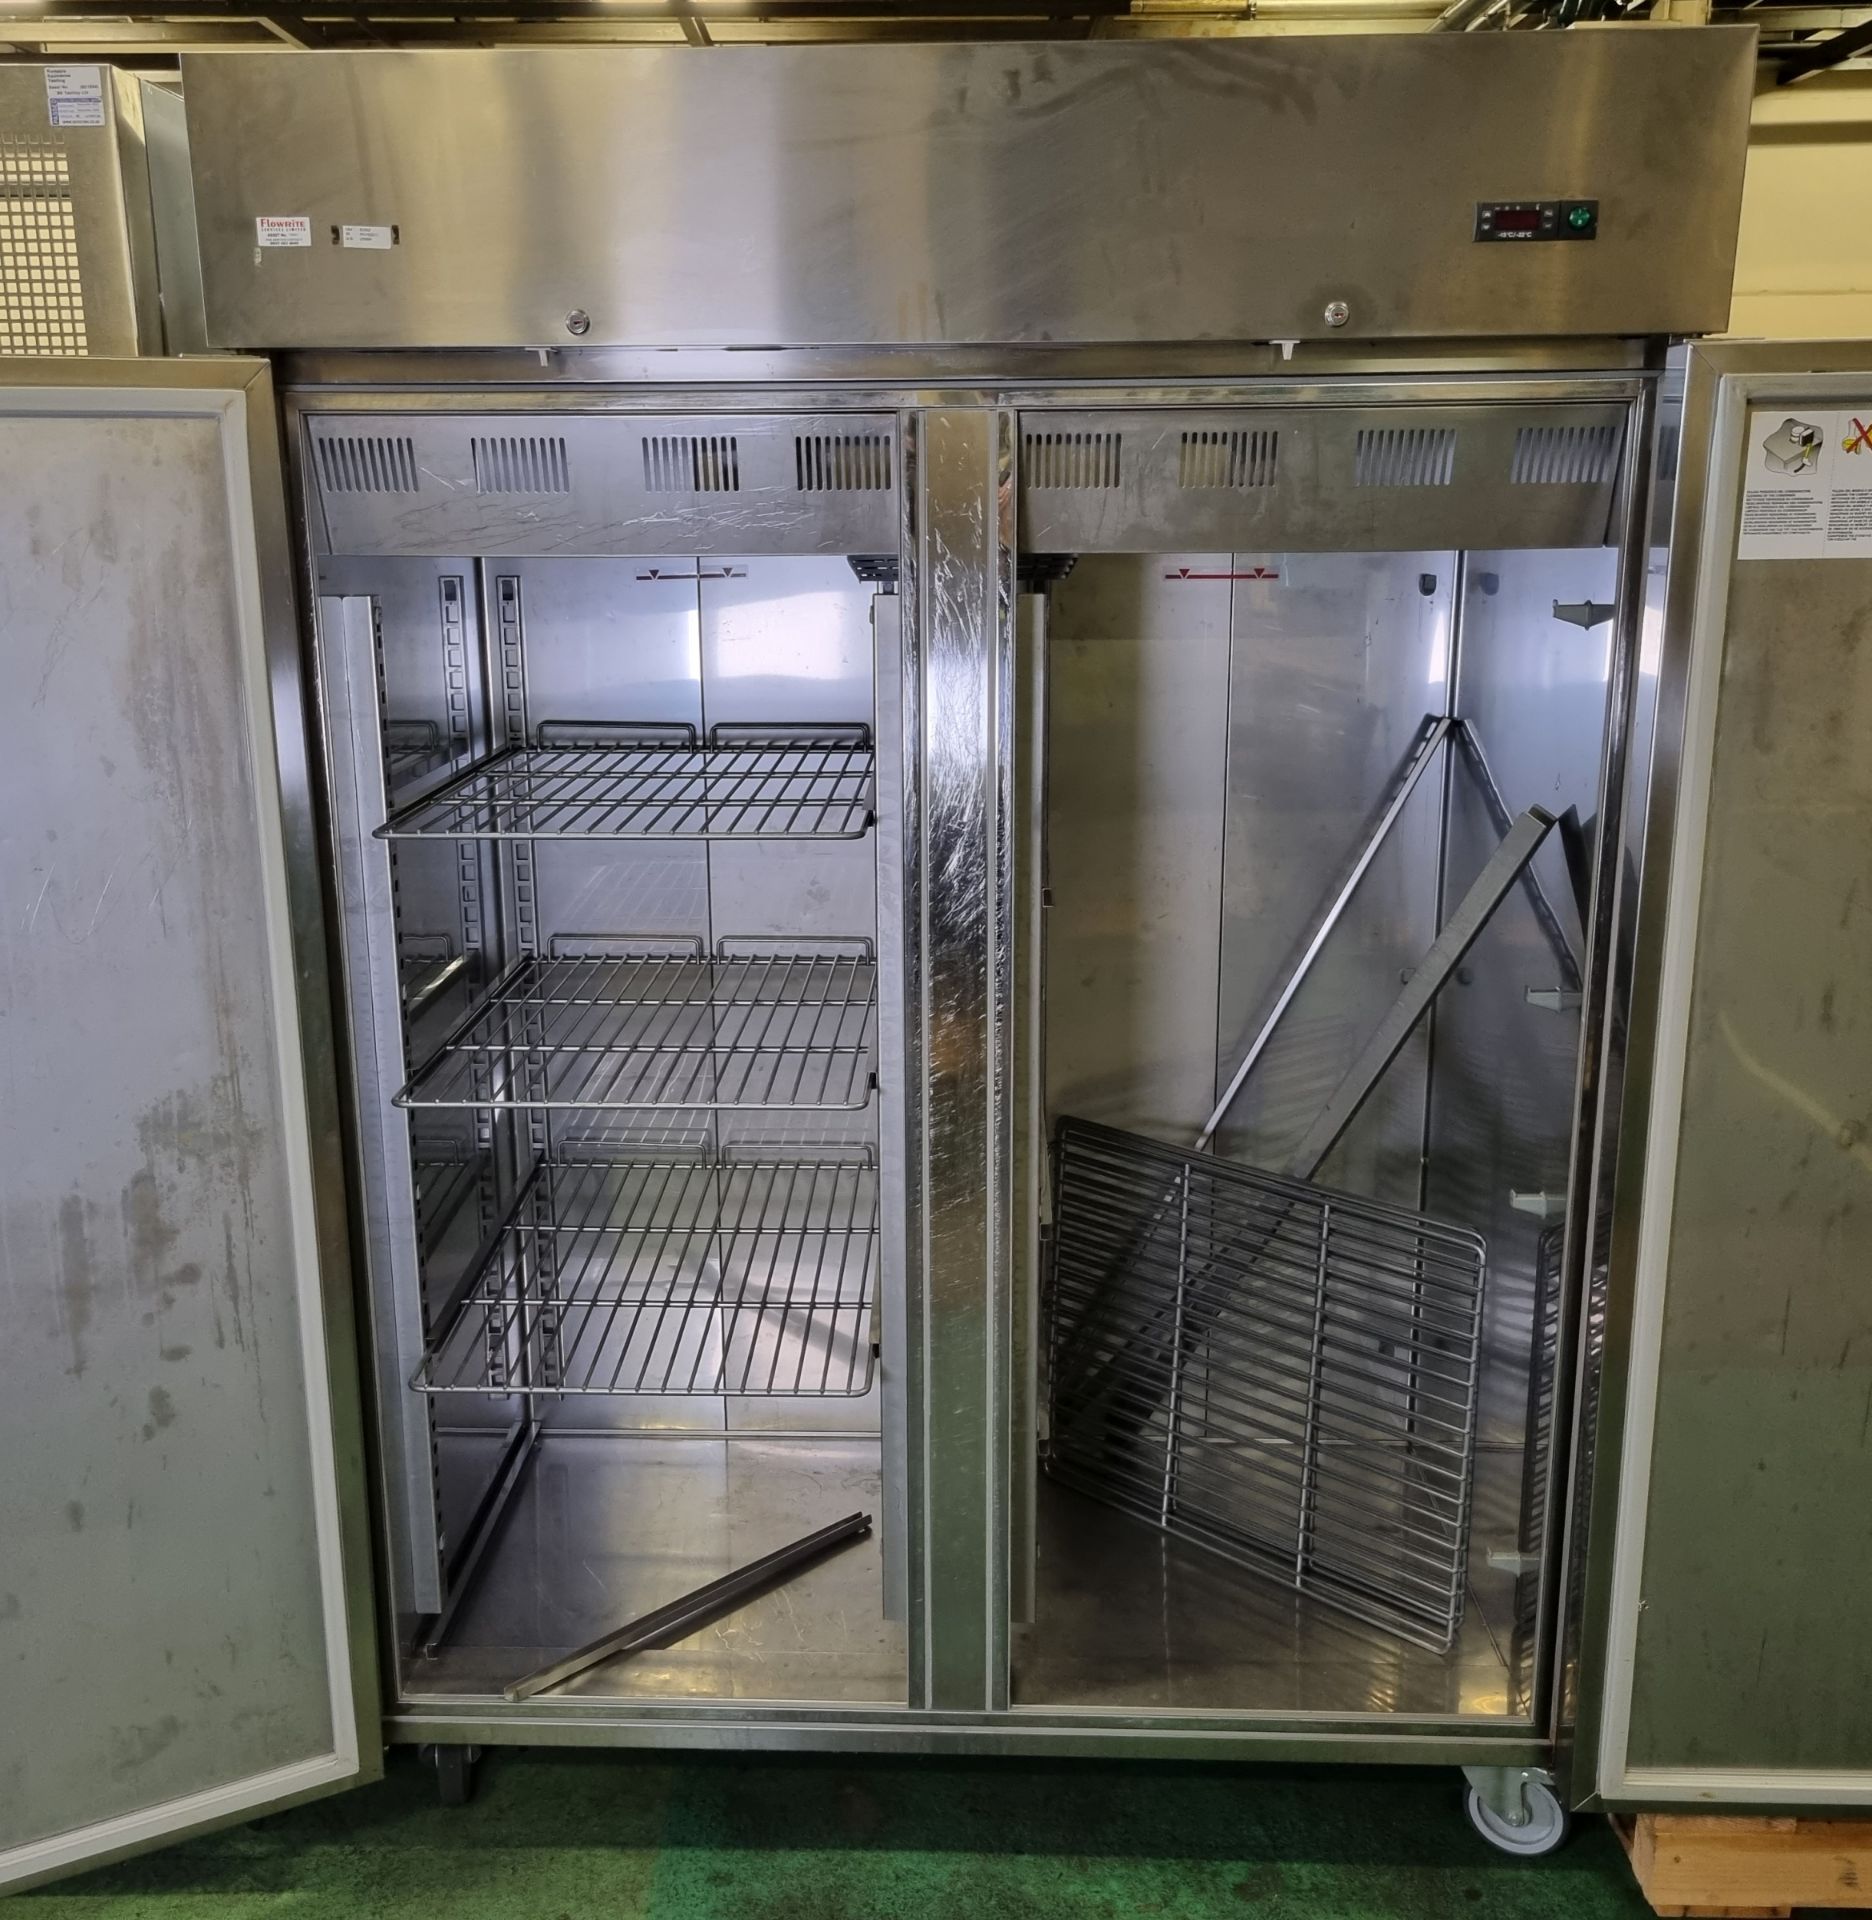 ECO Refrigerazione MIC300ED.0623 stainless steel double door freezer - W 1450 x D 780 x H 2000mm - Image 3 of 7